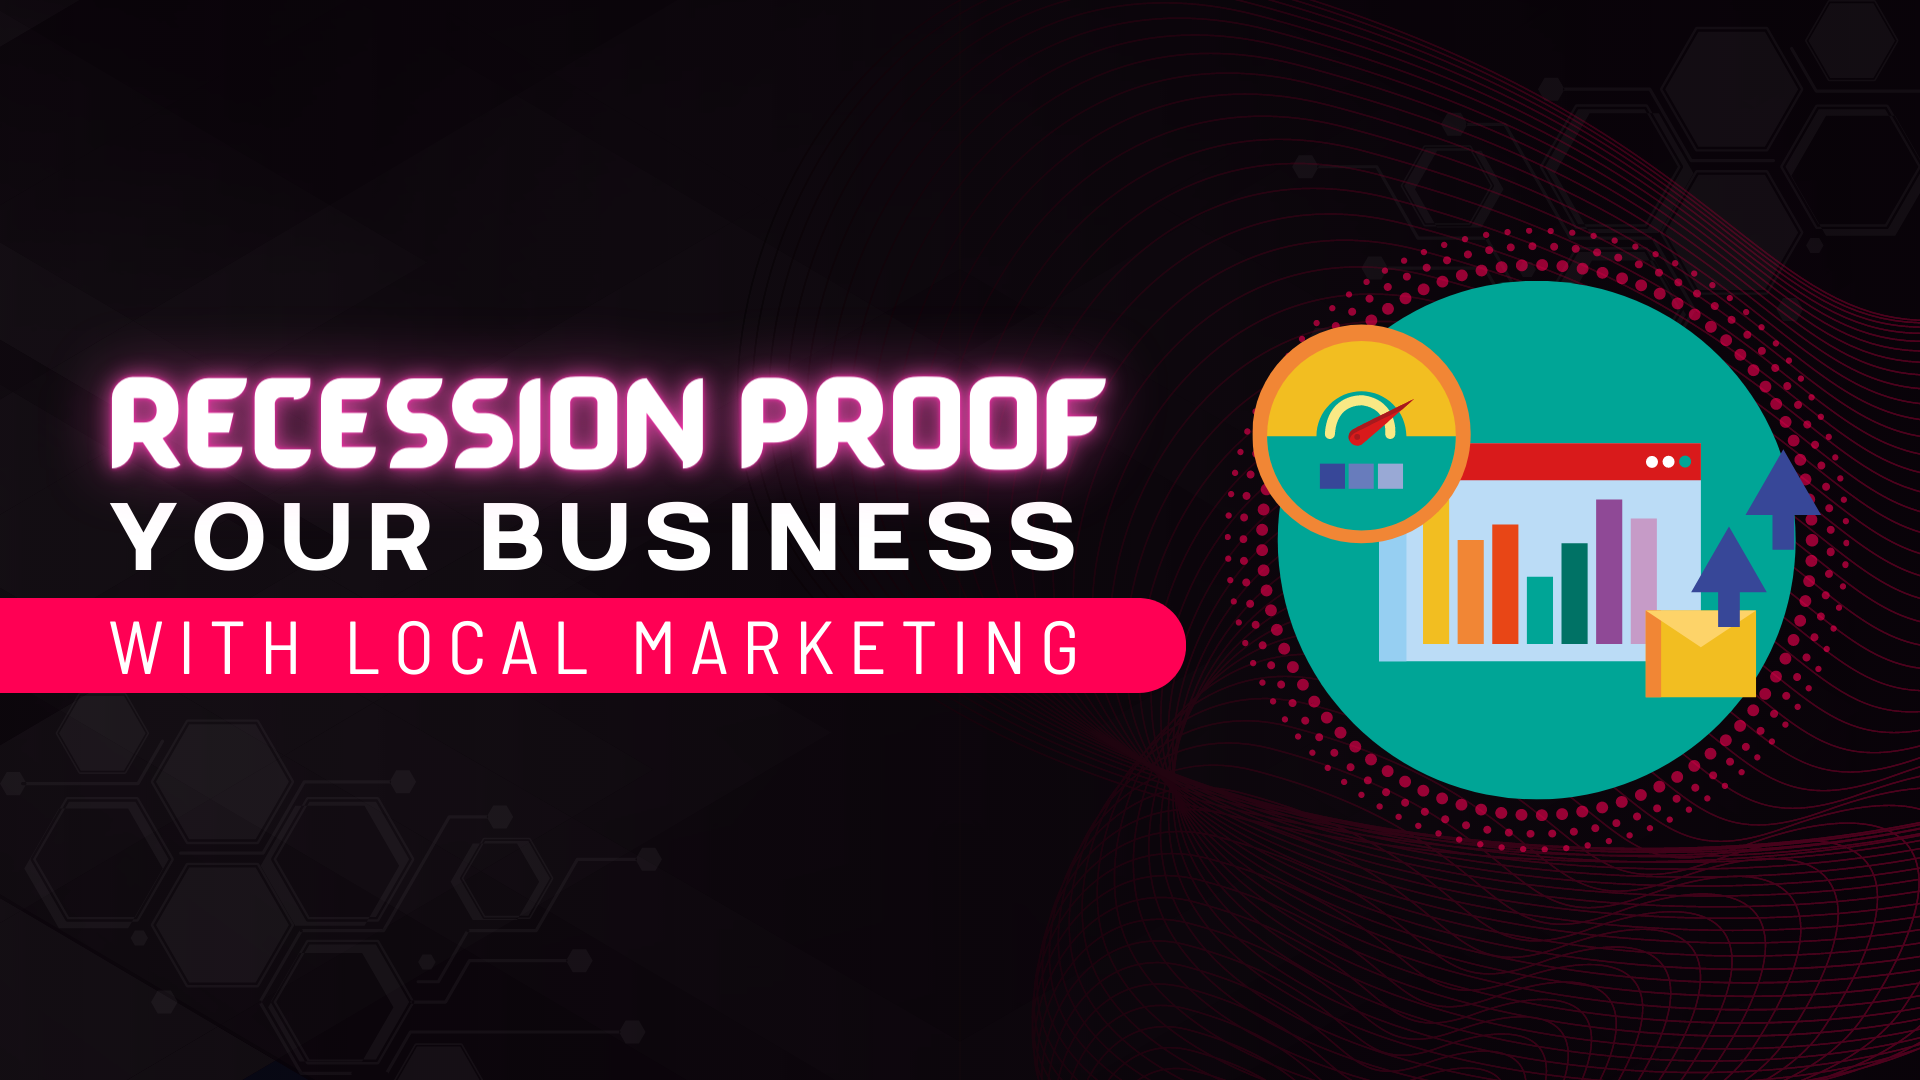 Recession Proof Your Business With Local Marketing